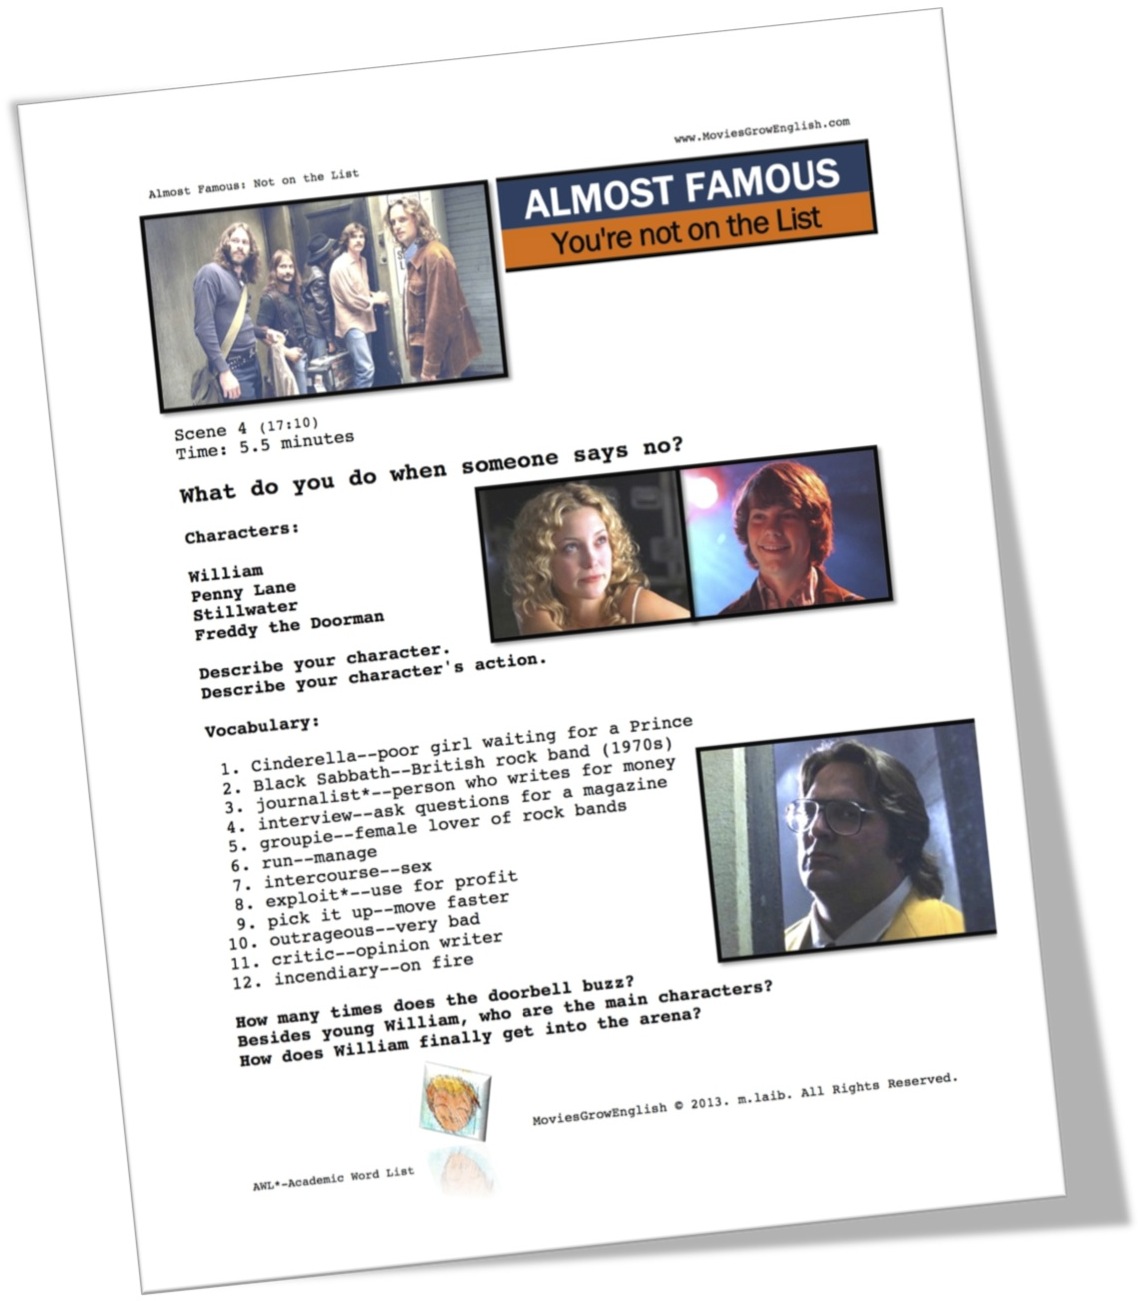 Short-Sequence ESL Lesson for Almost Famous: You're not on the List at Movies Grow English